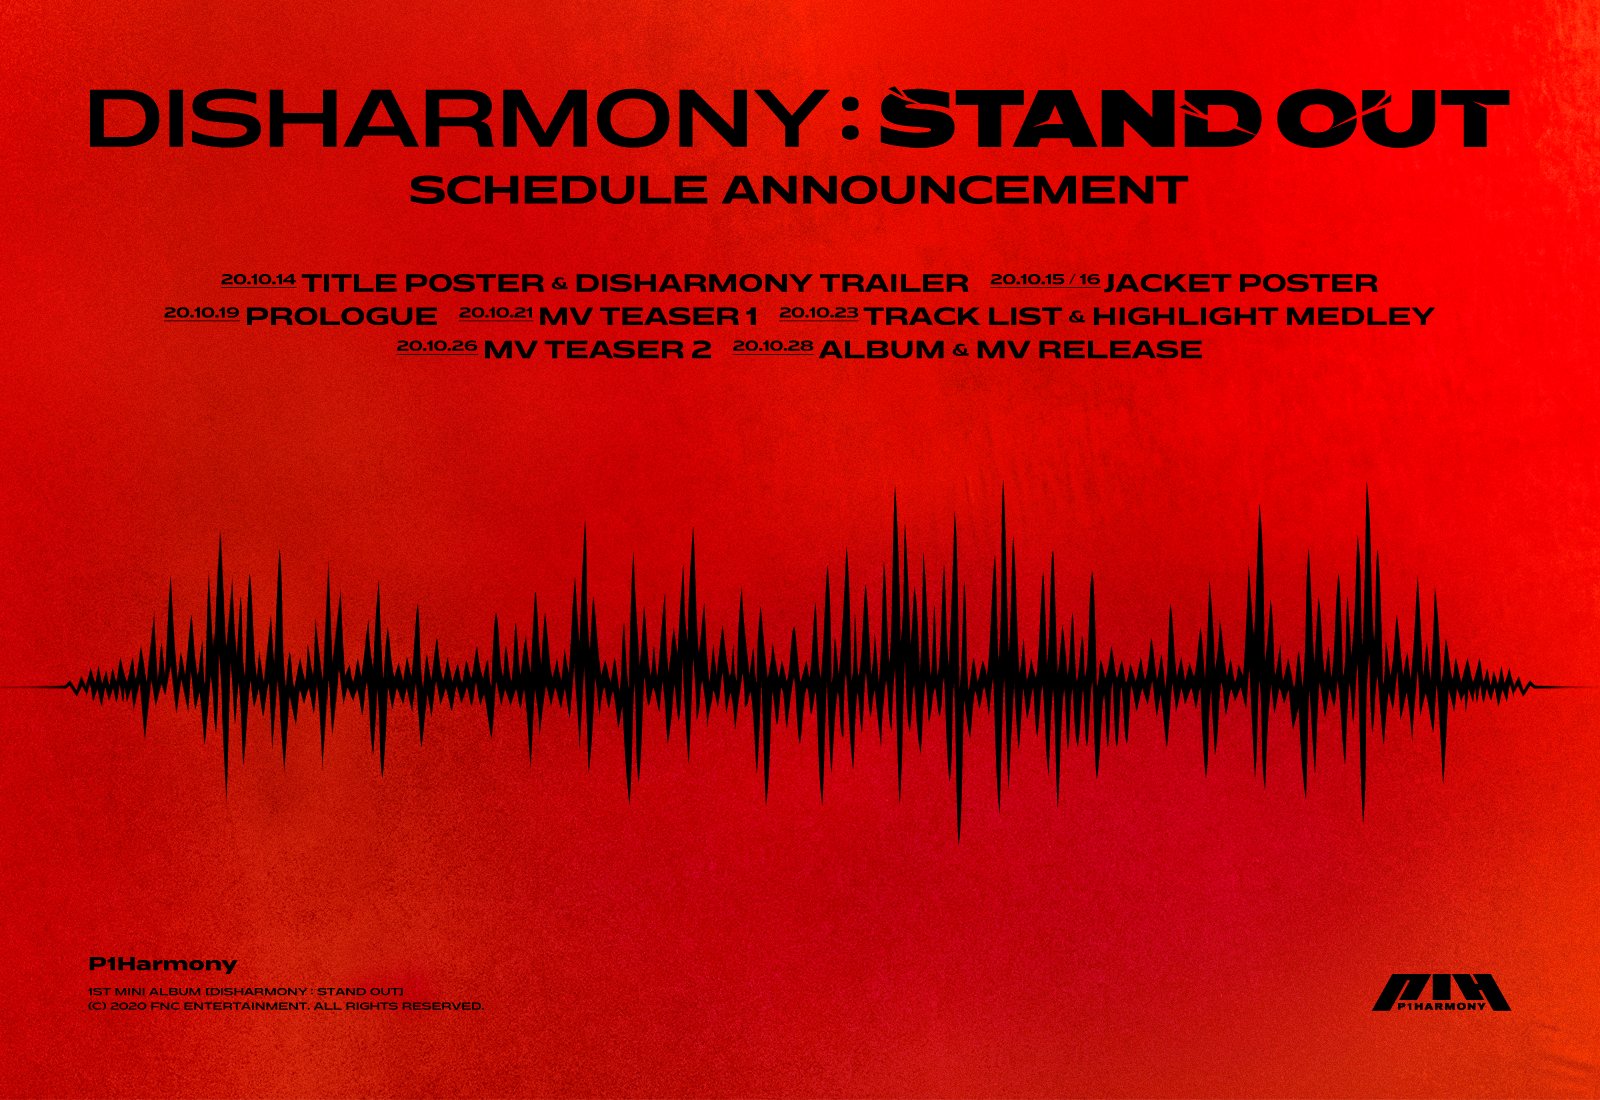 new-boy-group-p1harmony-confirmed-to-debut-with-disharmony-stand-out-on-october-23-2